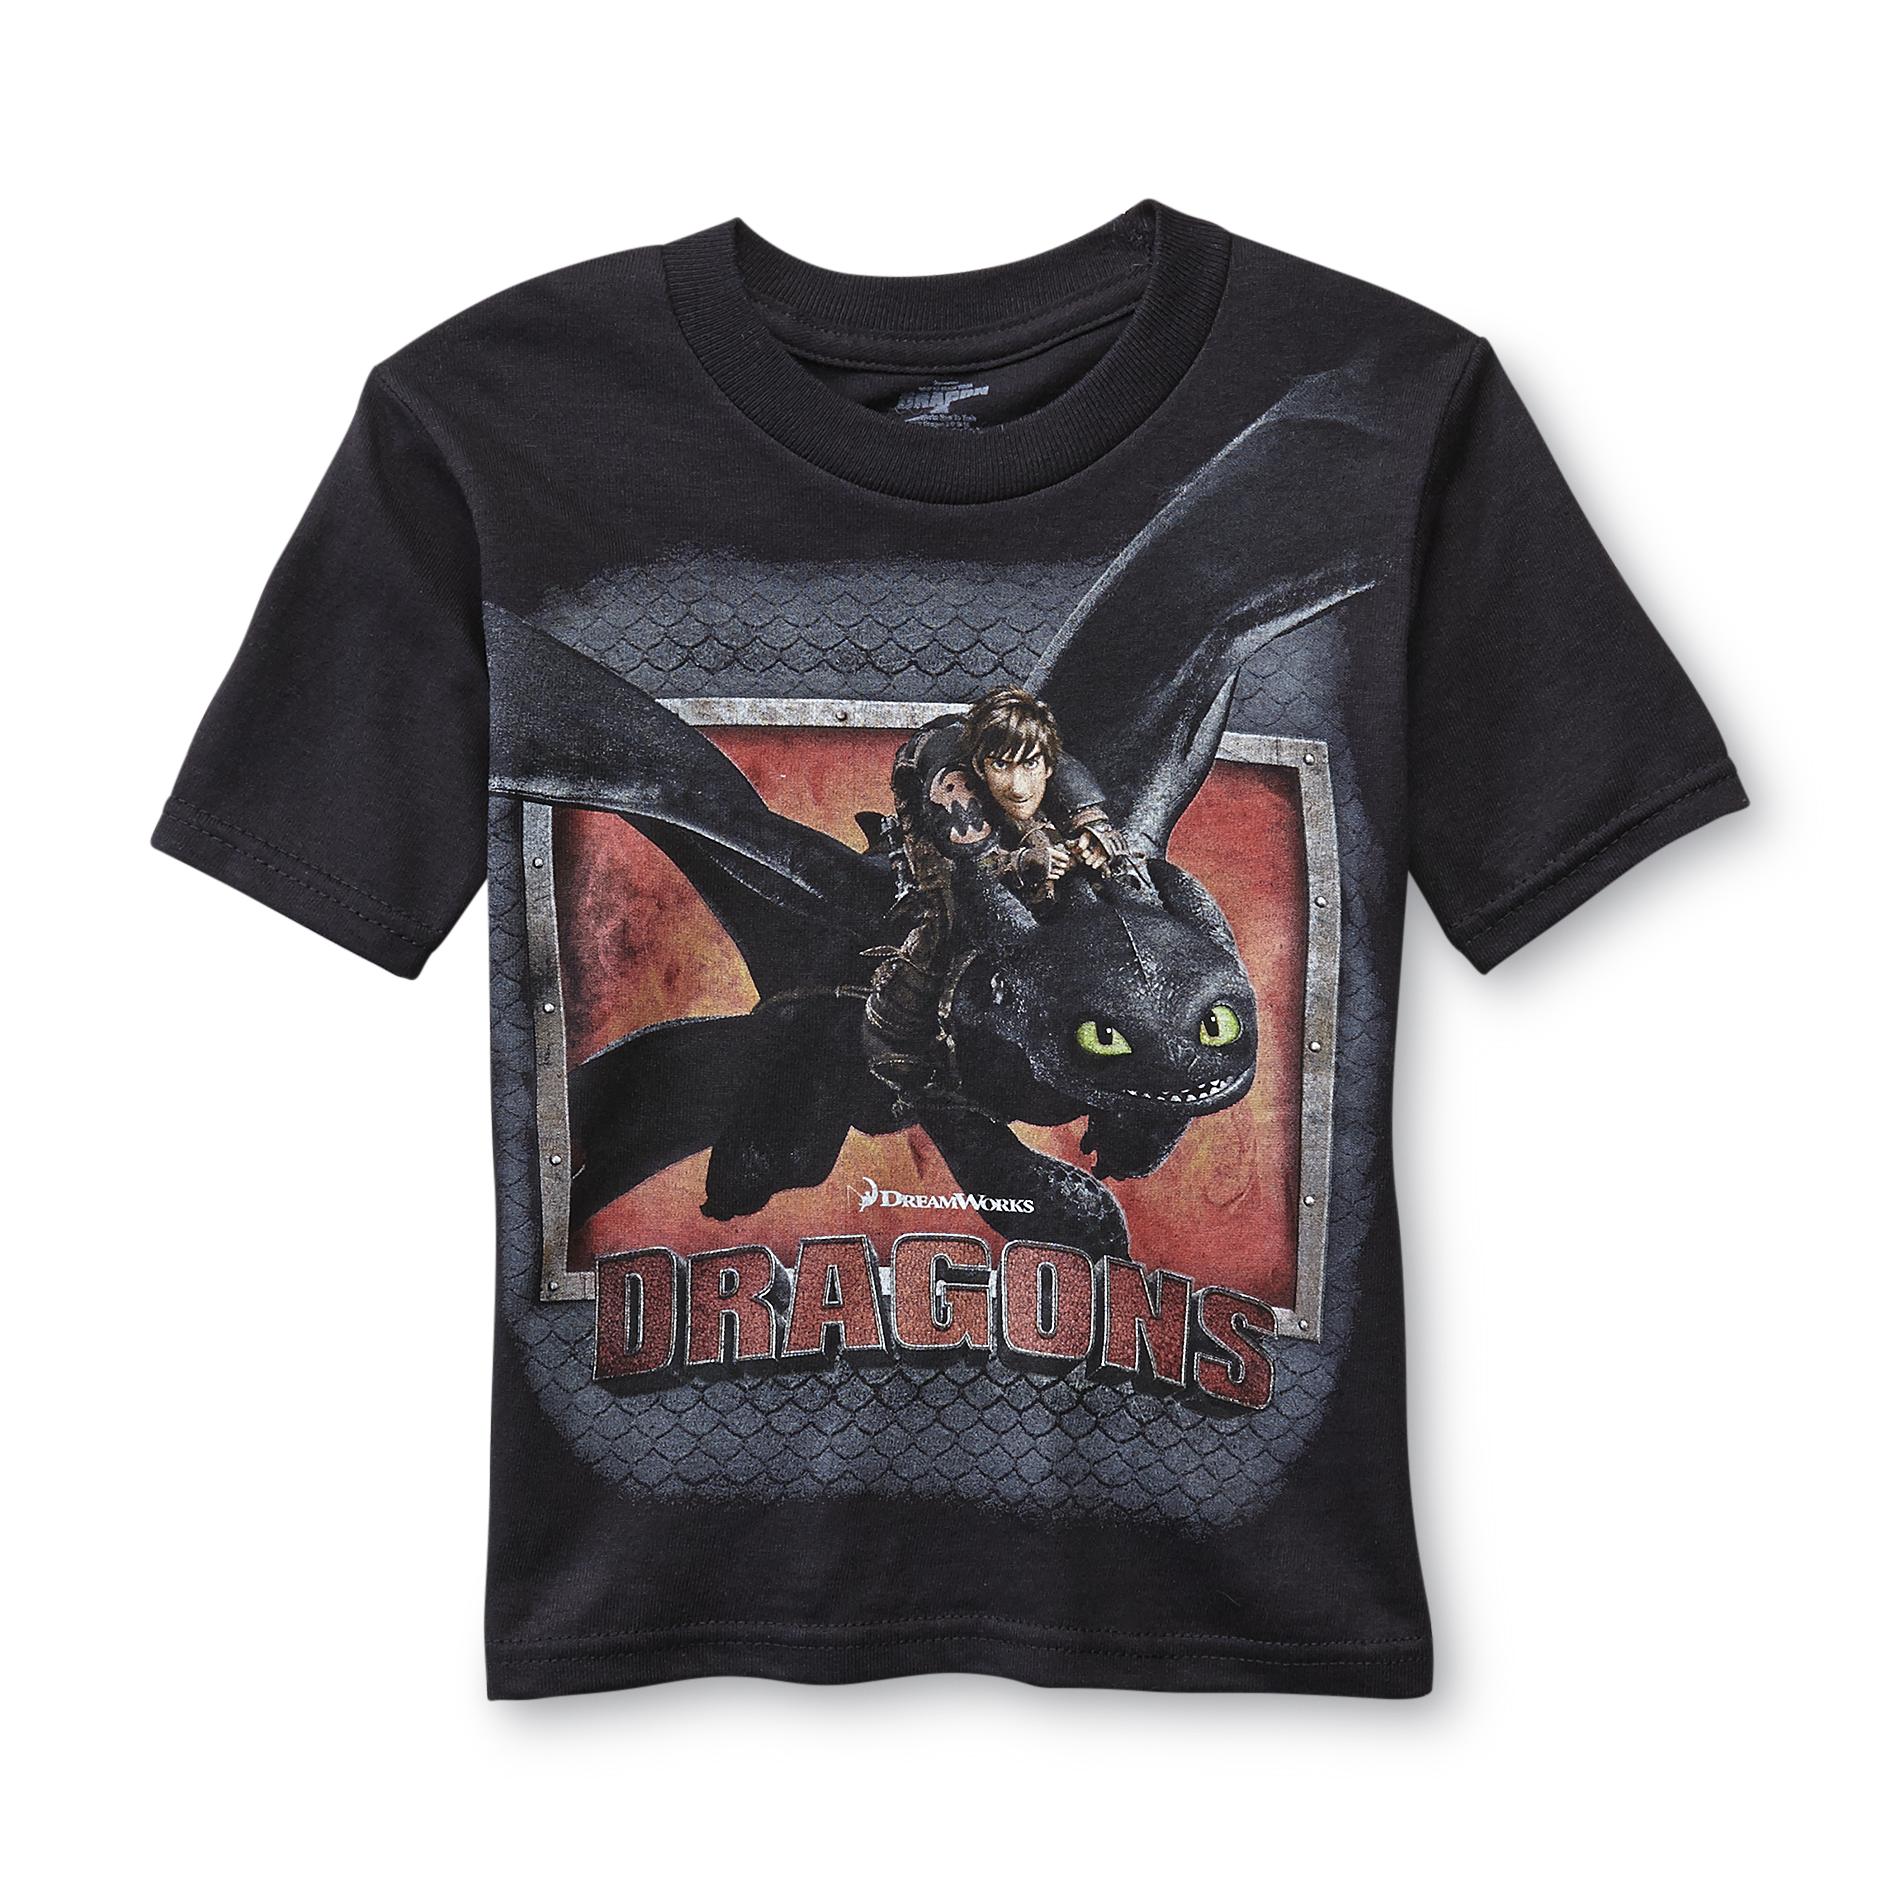 Dreamworks How To Train Your Dragon 2 Toddler Boy's Graphic T-Shirt - Toothless